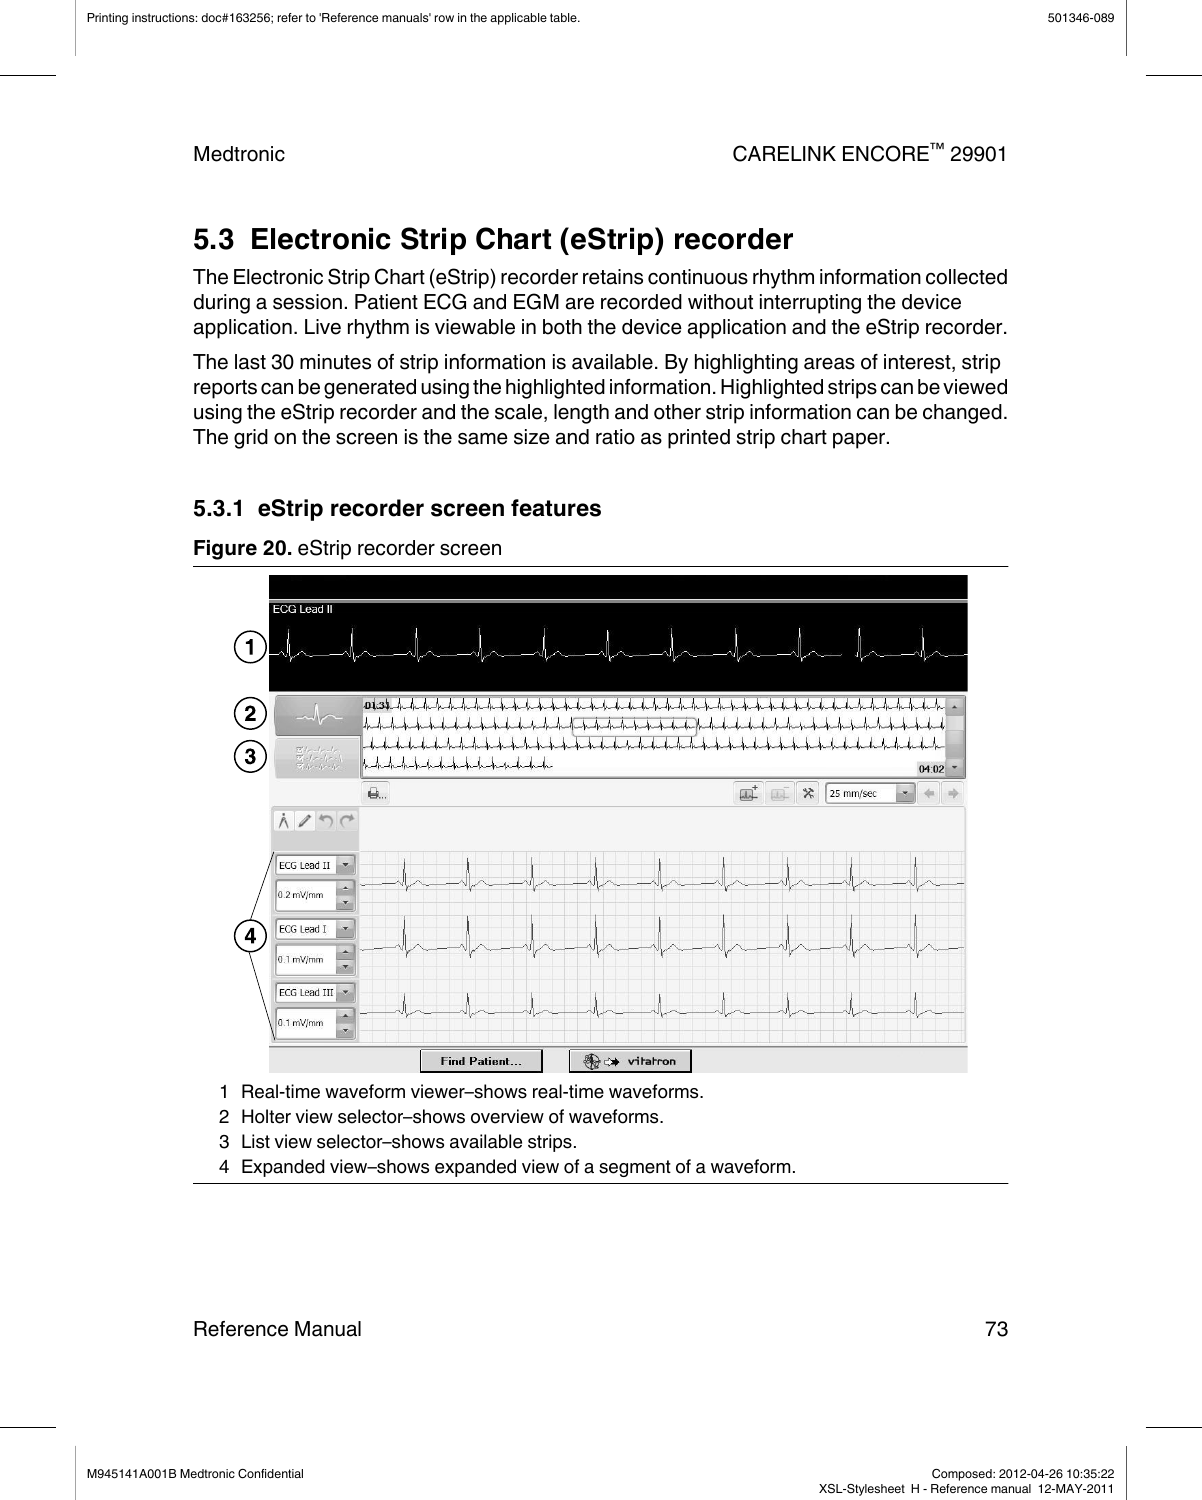 5.3  Electronic Strip Chart (eStrip) recorderThe Electronic Strip Chart (eStrip) recorder retains continuous rhythm information collectedduring a session. Patient ECG and EGM are recorded without interrupting the deviceapplication. Live rhythm is viewable in both the device application and the eStrip recorder.The last 30 minutes of strip information is available. By highlighting areas of interest, stripreports can be generated using the highlighted information. Highlighted strips can be viewedusing the eStrip recorder and the scale, length and other strip information can be changed.The grid on the screen is the same size and ratio as printed strip chart paper.5.3.1  eStrip recorder screen featuresFigure 20. eStrip recorder screen1 Real-time waveform viewer–shows real-time waveforms.2 Holter view selector–shows overview of waveforms.3 List view selector–shows available strips.4 Expanded view–shows expanded view of a segment of a waveform.Printing instructions: doc#163256; refer to &apos;Reference manuals&apos; row in the applicable table. 501346-089Medtronic CARELINK ENCORE™ 29901Reference Manual 73M945141A001B Medtronic Confidential   Composed: 2012-04-26 10:35:22XSL-Stylesheet  H - Reference manual  12-MAY-2011